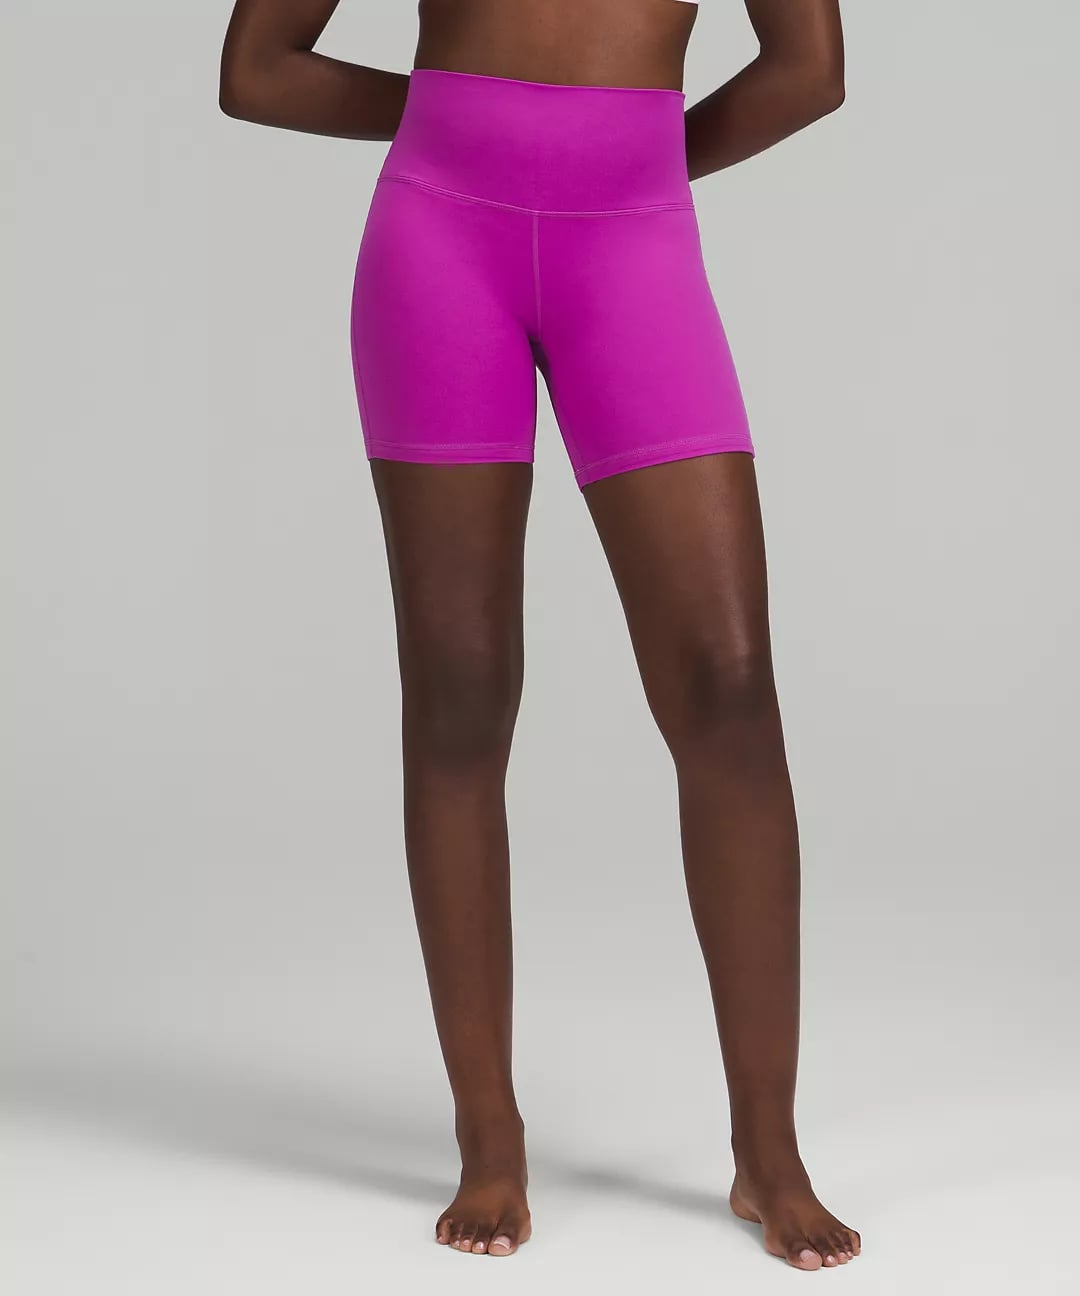 Best Bike Shorts for Yoga: Lululemon Align™ High-Rise Short 6, Looking  For the Cutest, Comfiest Bike Shorts? We've Got You Covered